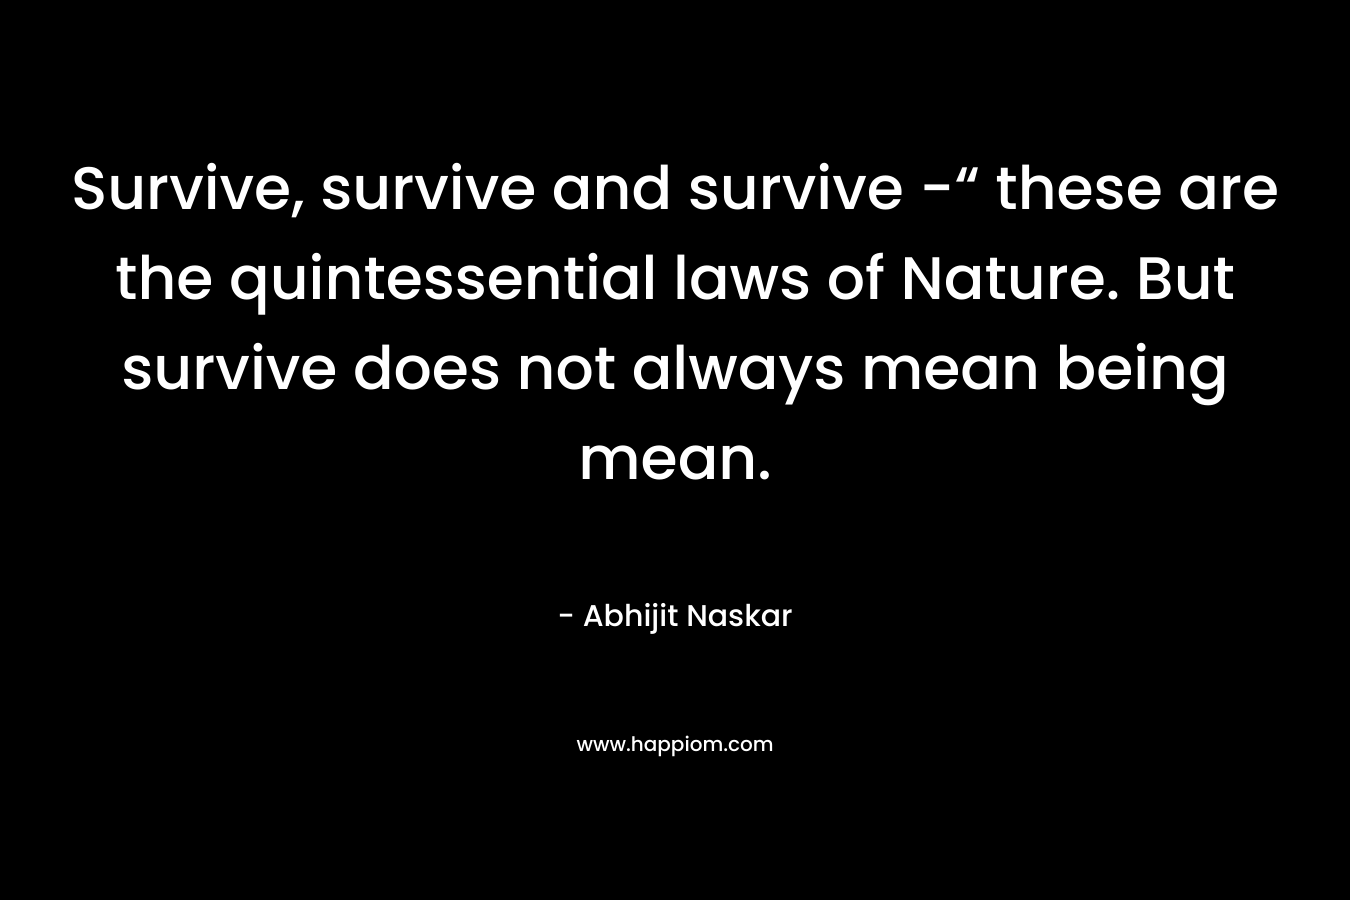 Survive, survive and survive -“ these are the quintessential laws of Nature. But survive does not always mean being mean.